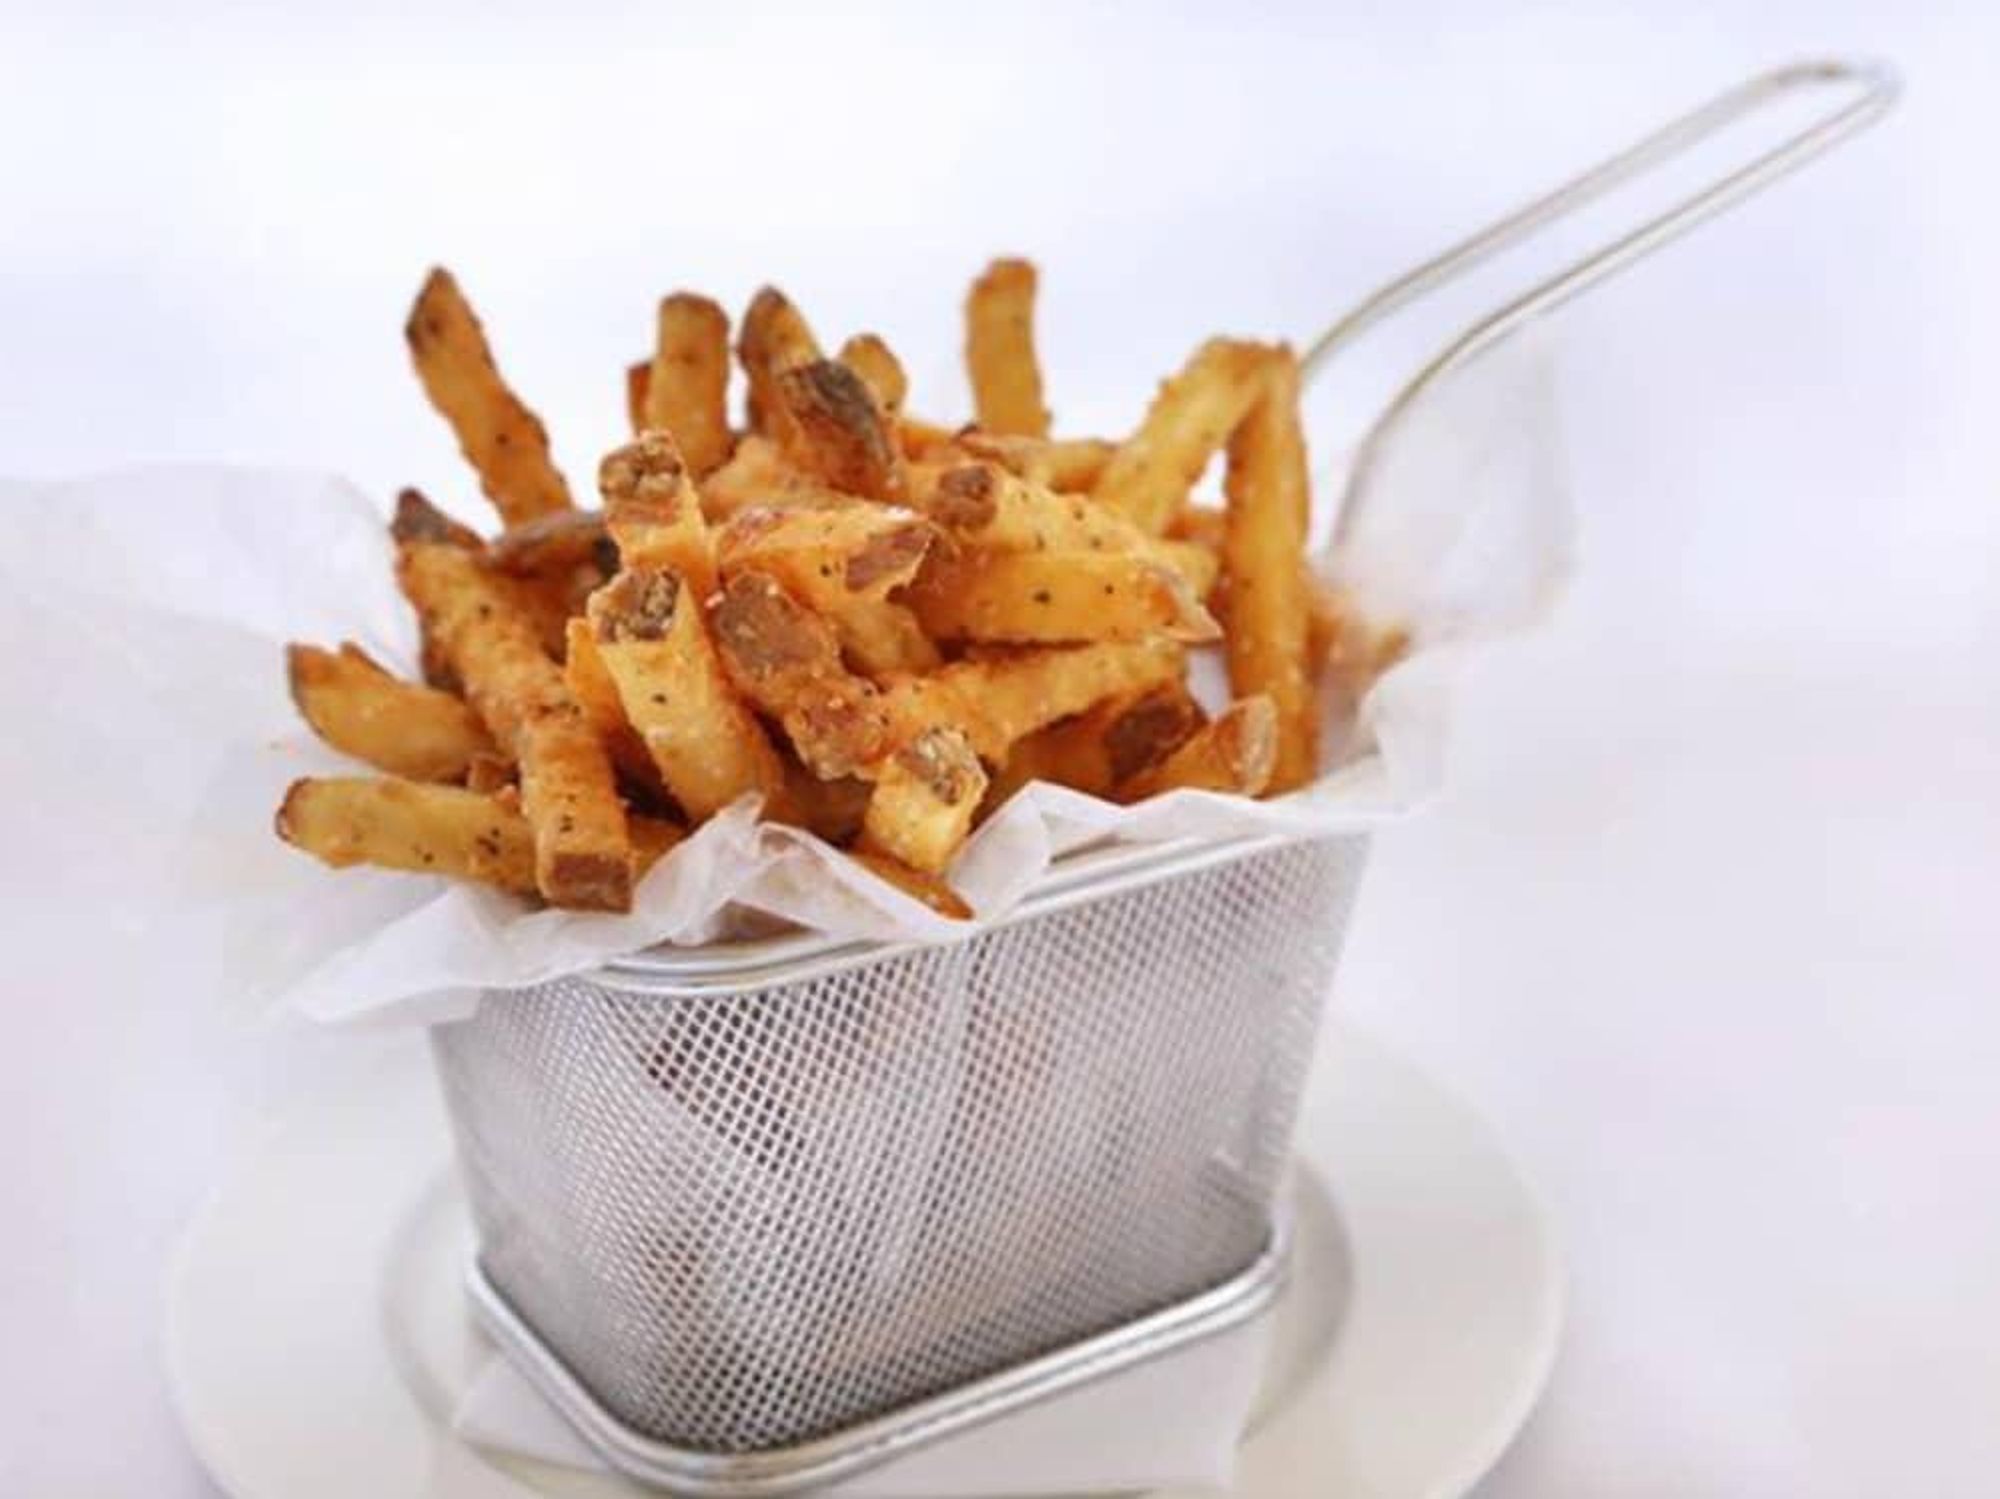 Hyde Park Bar & Grill french fries 2015